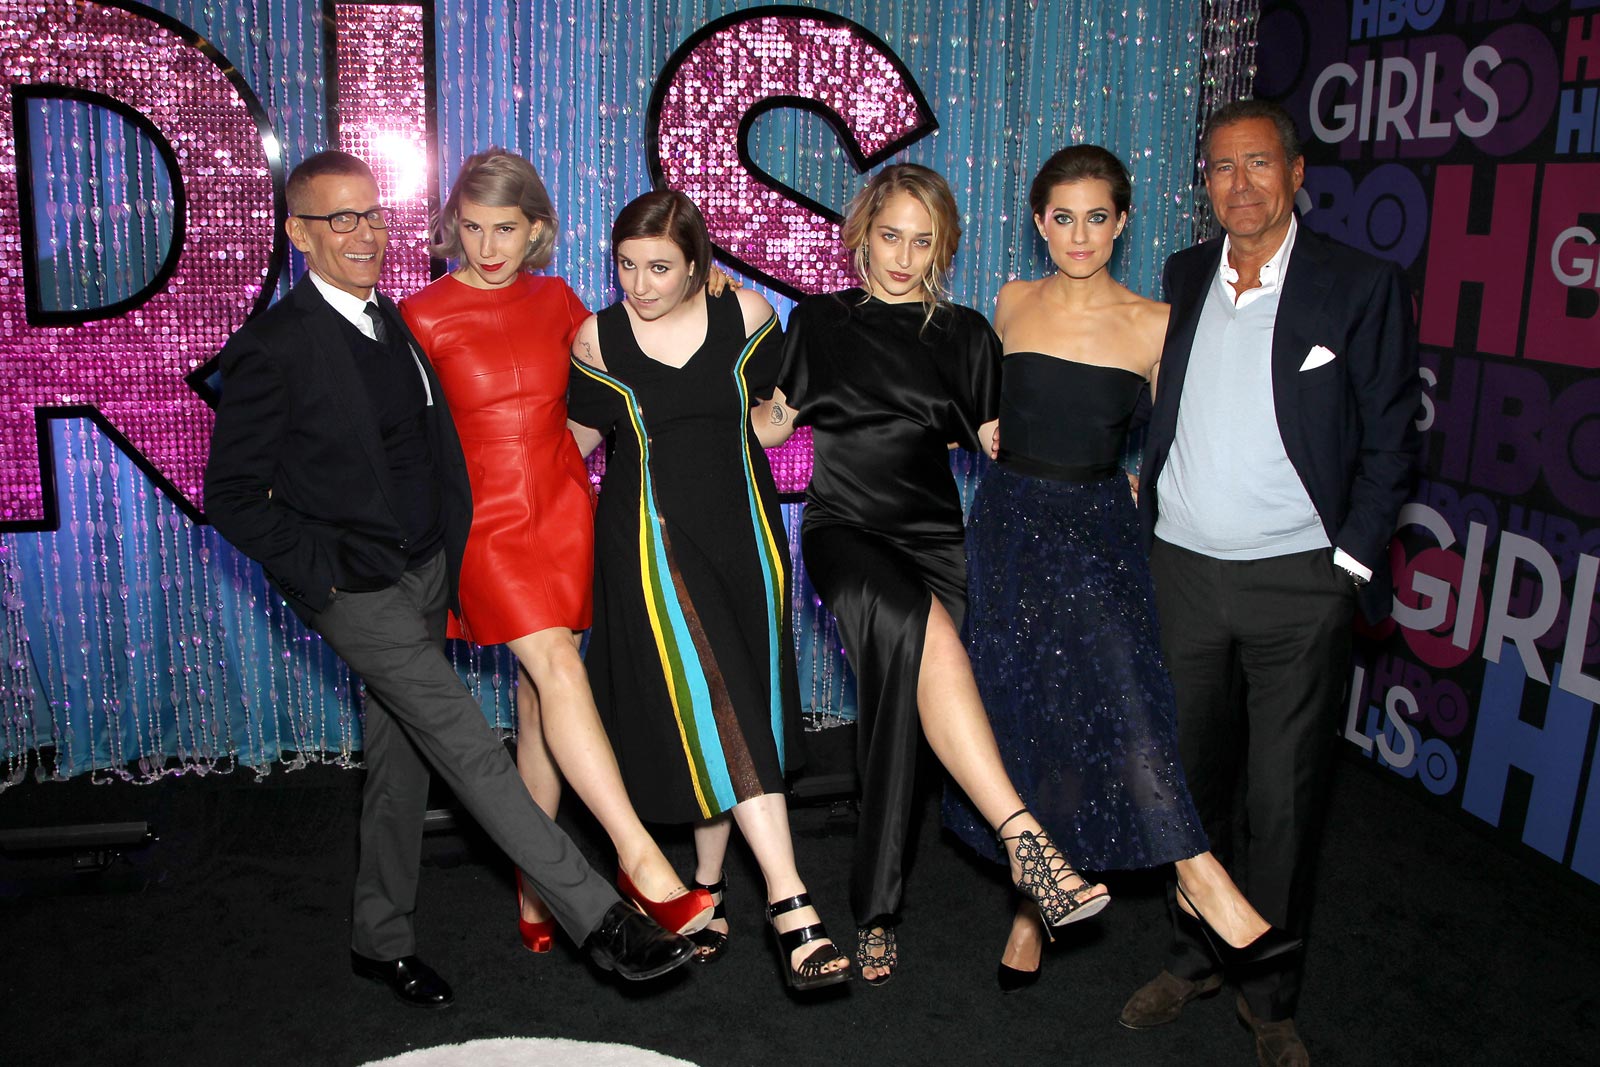 Zosia Mamet attends the fourth season premiere of Girls